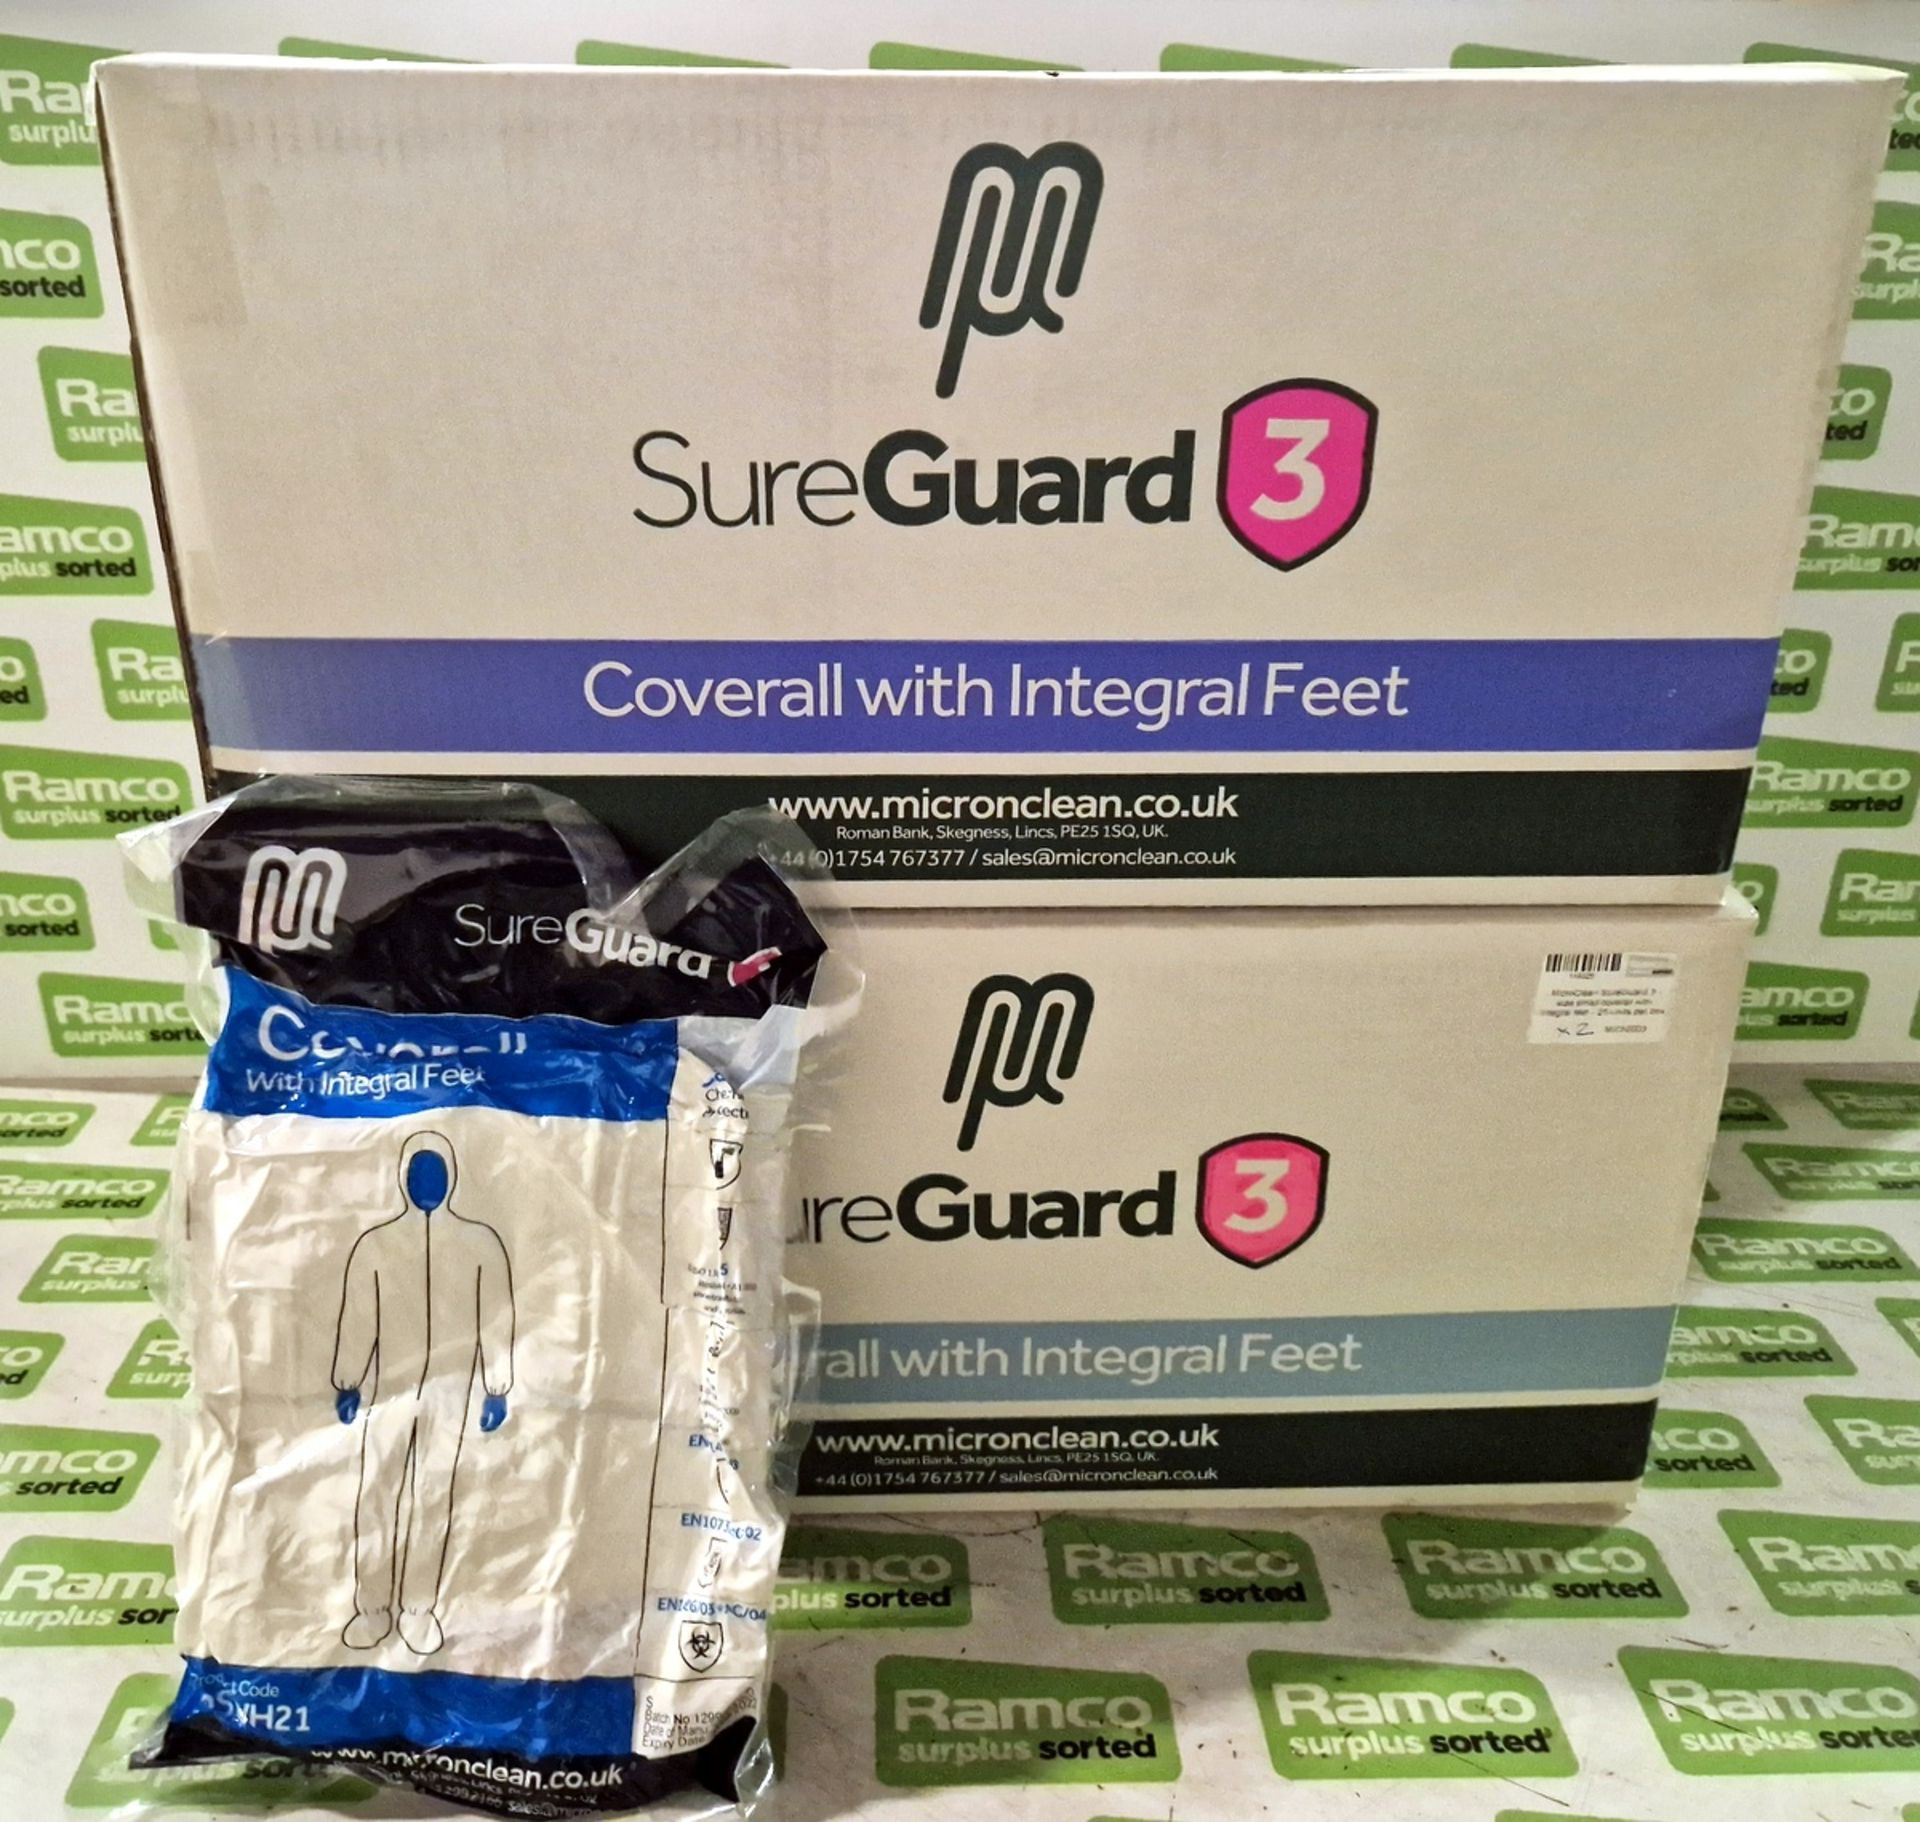 2x boxes of MicroClean SureGuard 3 coveralls with integral feet - size small - 25 units per box - Image 2 of 4